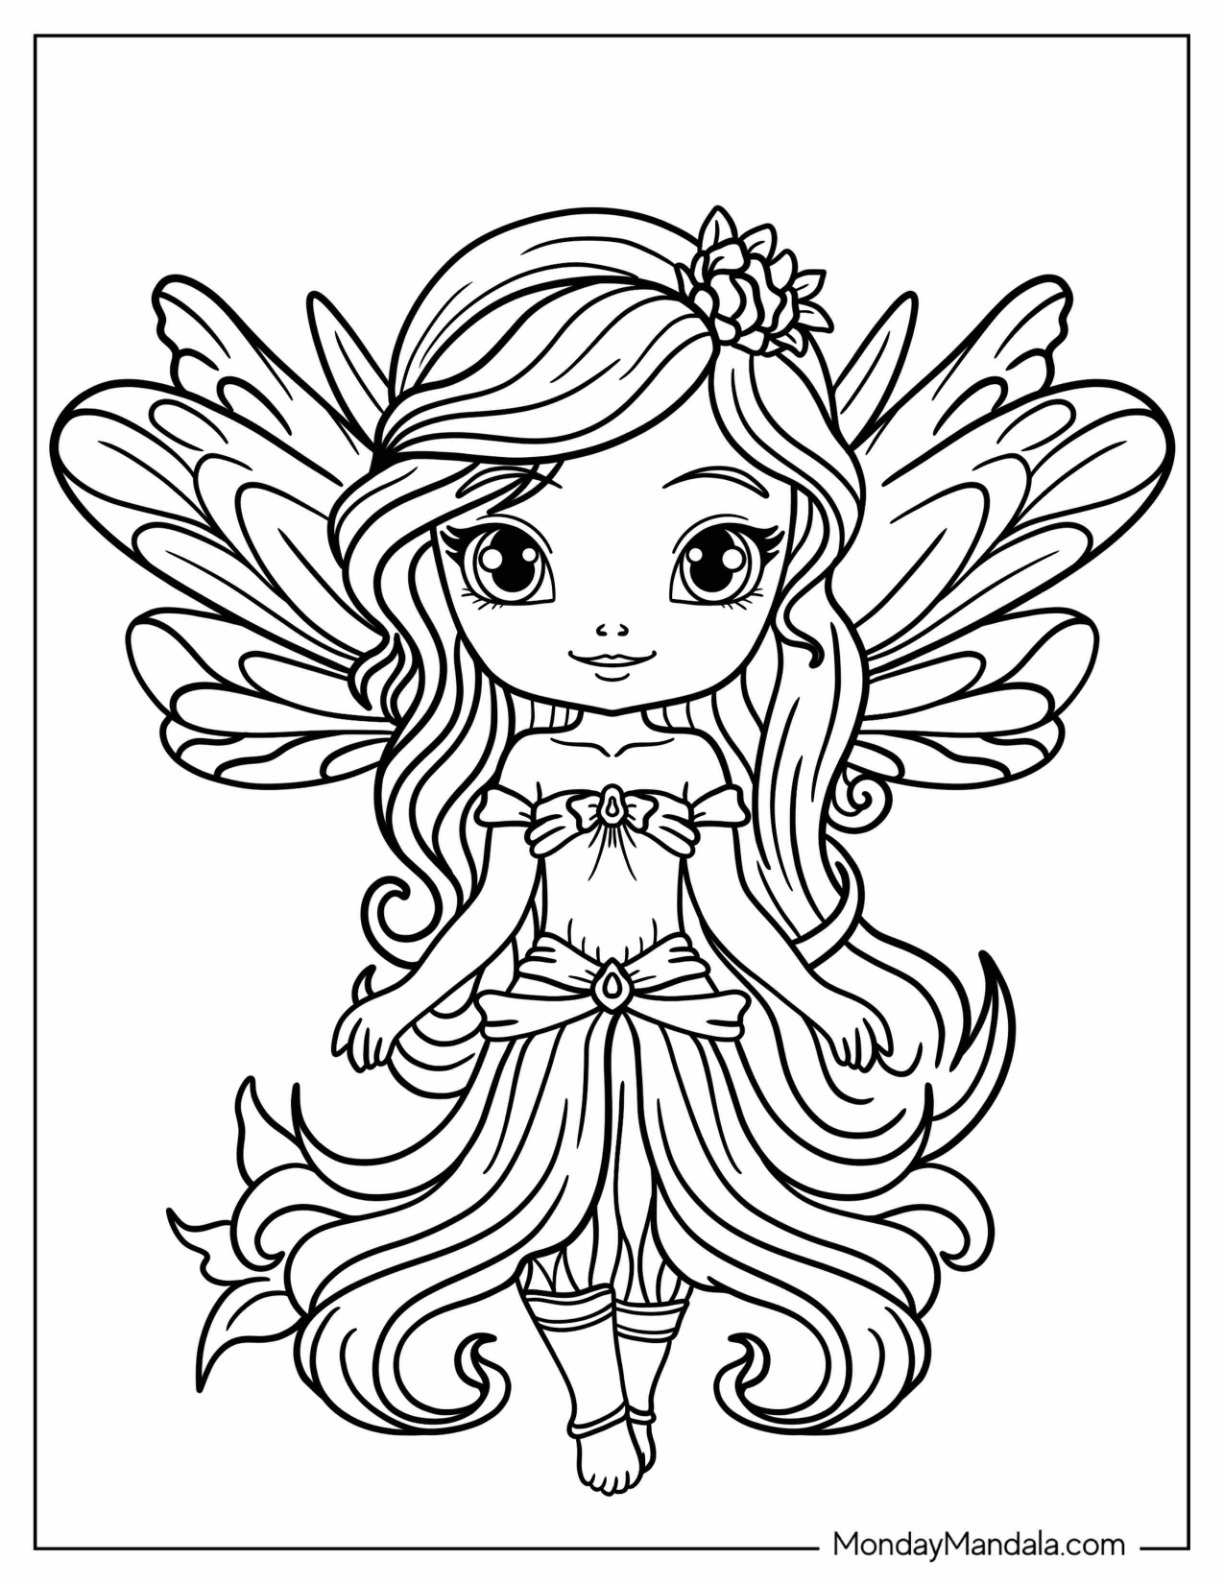 Fairy coloring pages free pdf printables